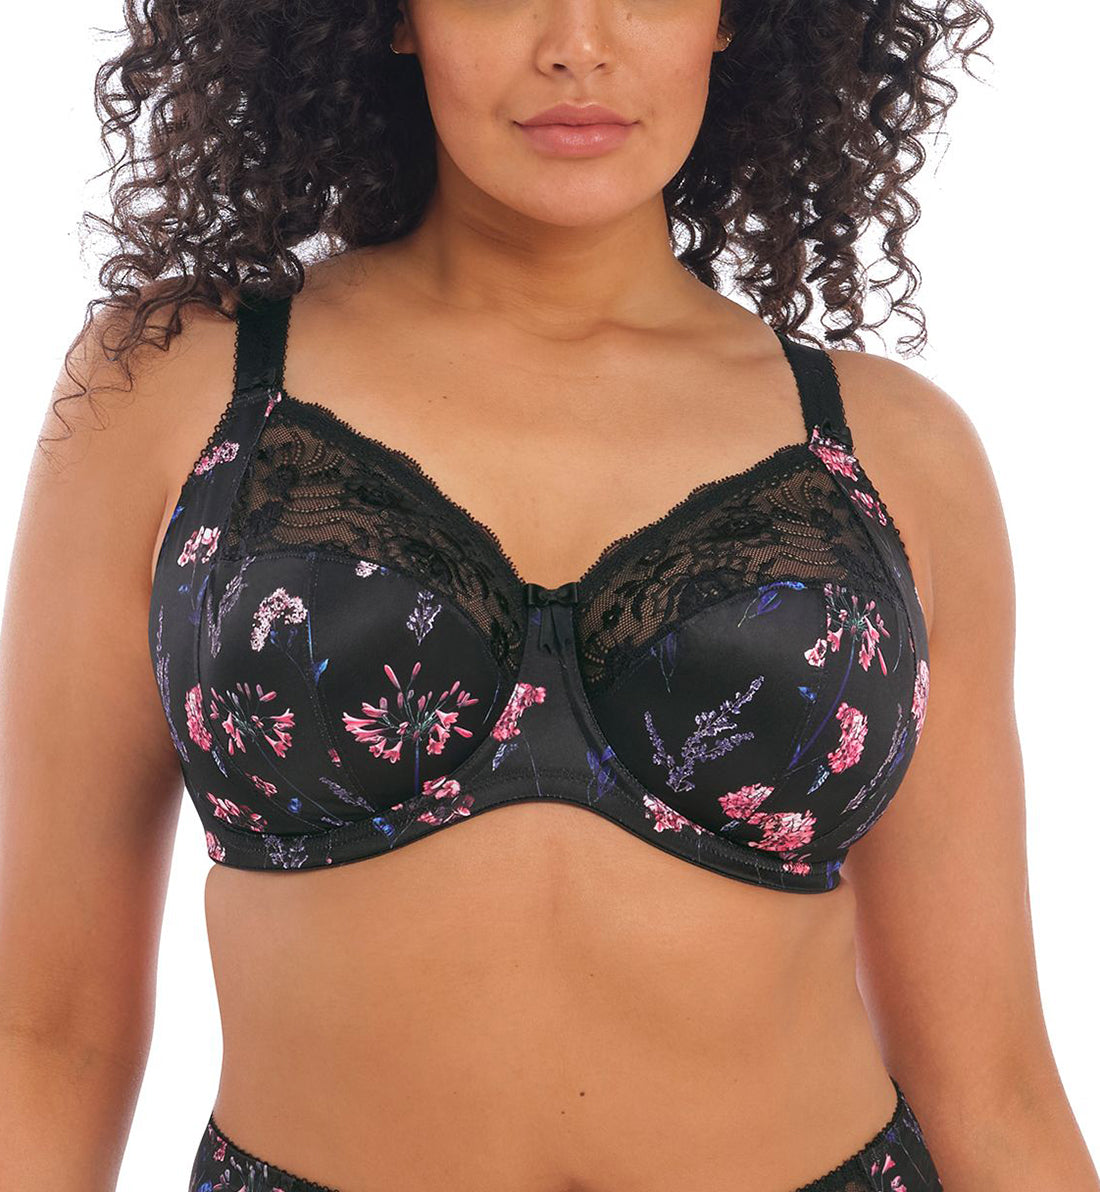 Elila Stretch Lace Bandless Underwire Bra in Plum - Busted Bra Shop